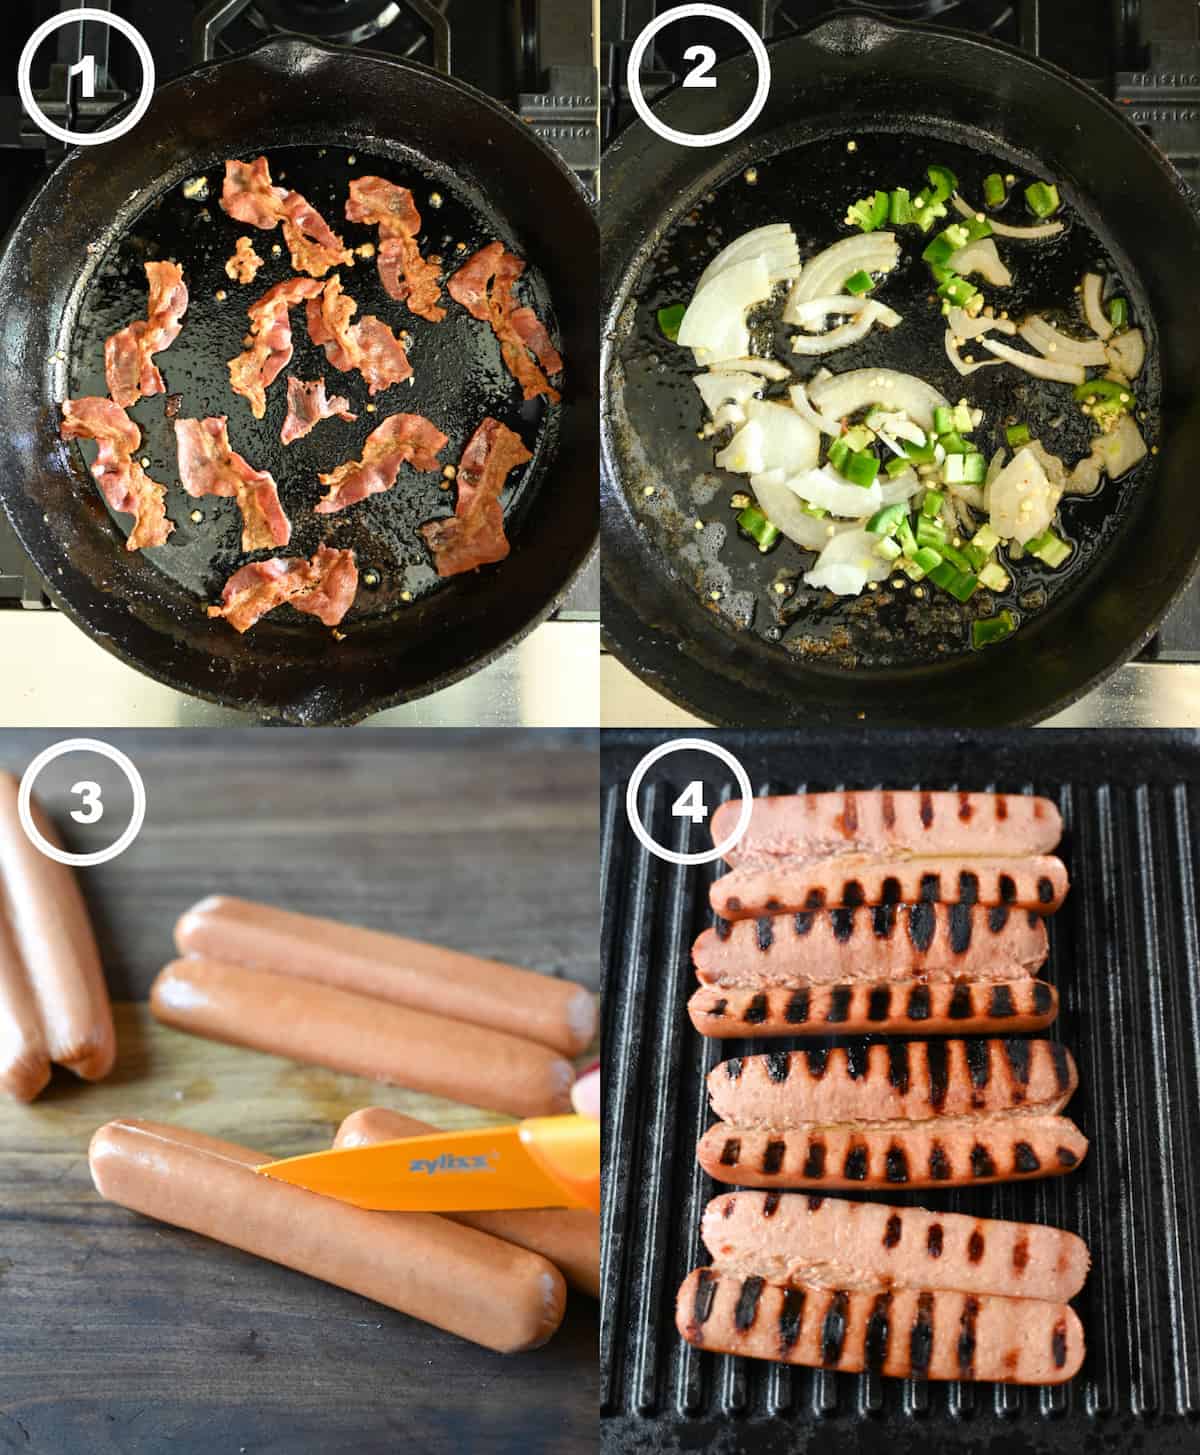 Four process photos. First one, bacon that has been fried in a skillet. Second one, onions and jalapenos are being cooked in the skillet. Third one, hotdogs are being sliced 3/4 of the way through. Fourth one, hot dogs are laying flat on a grill pan.